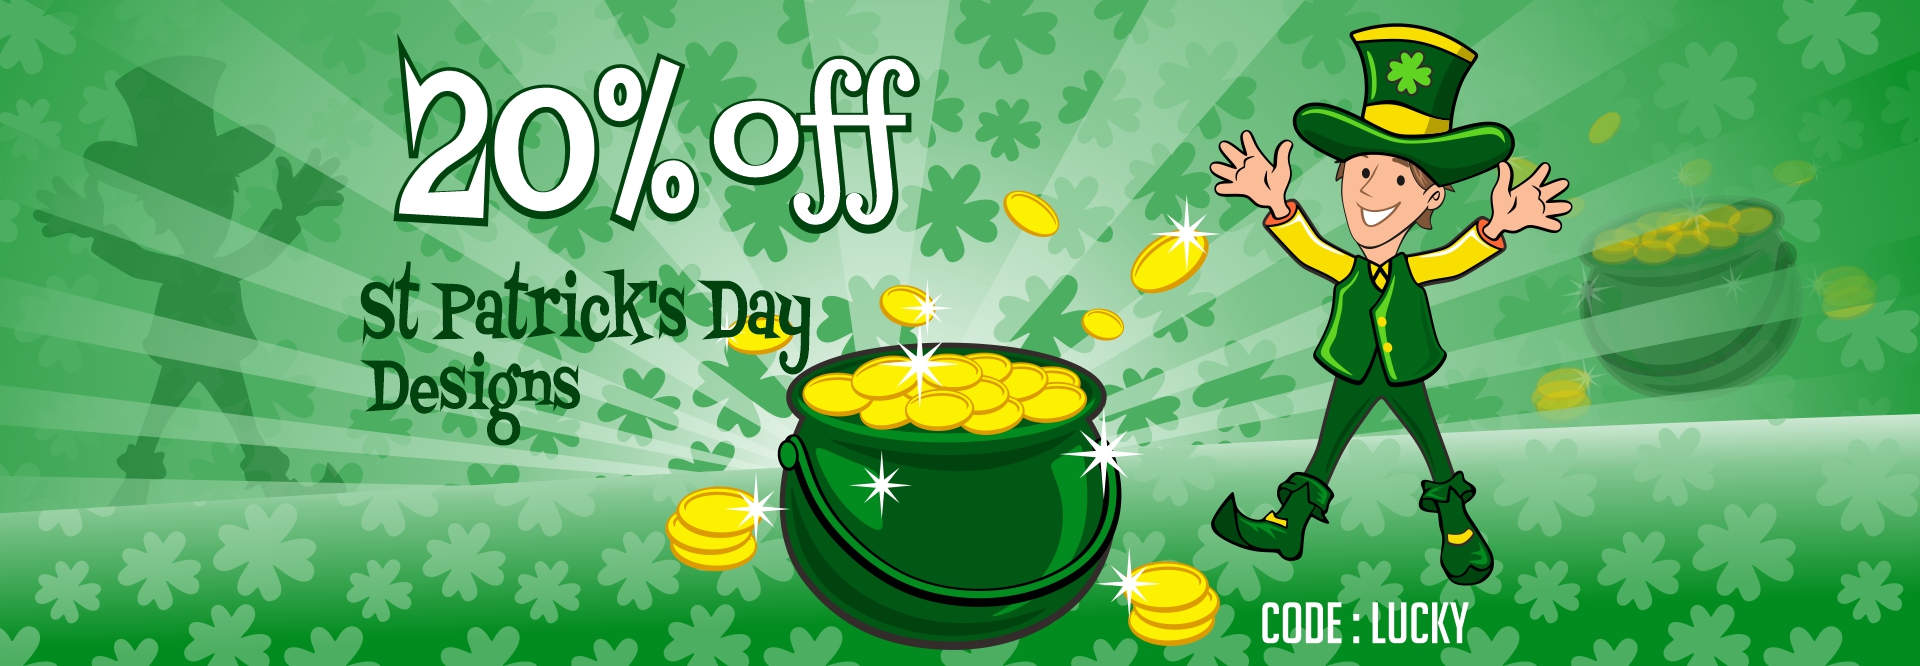 St Paddy's Day Sale